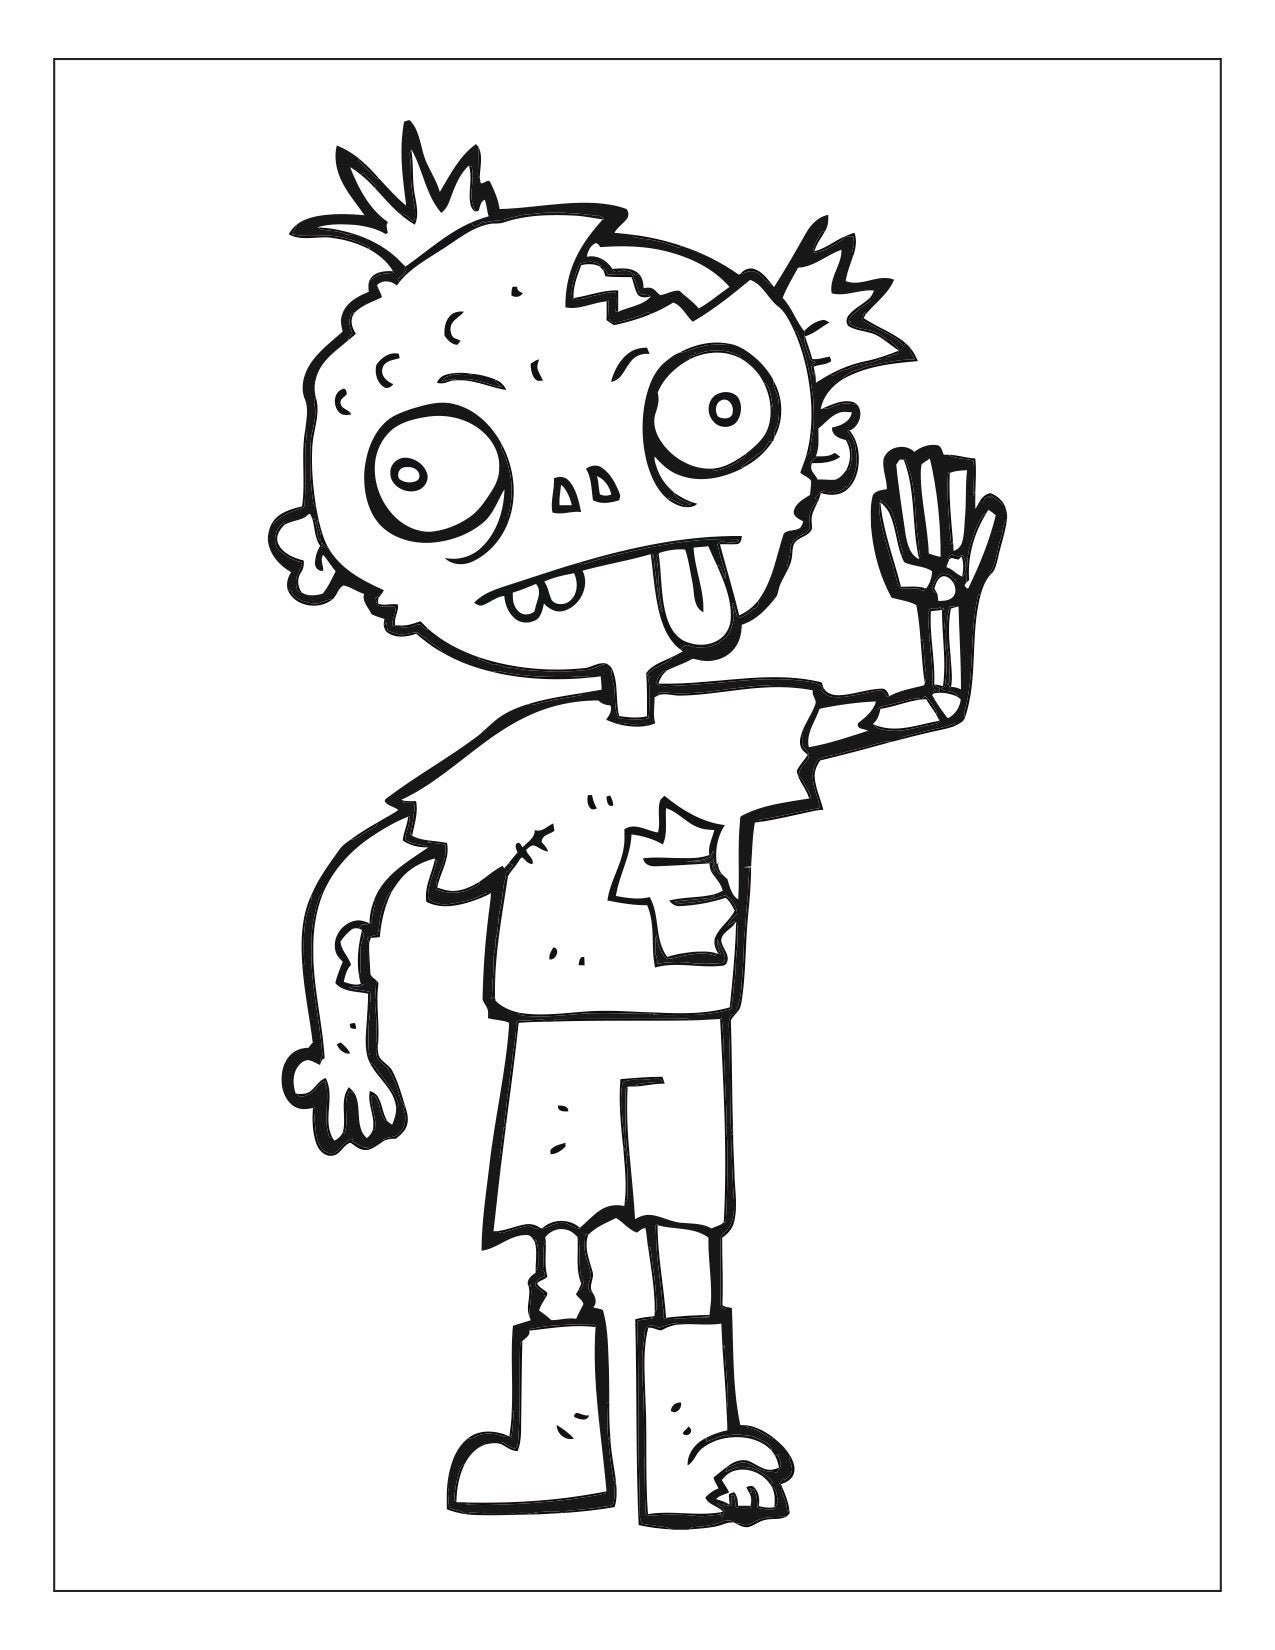 21 printable coloring pages of Zombies | Etsy